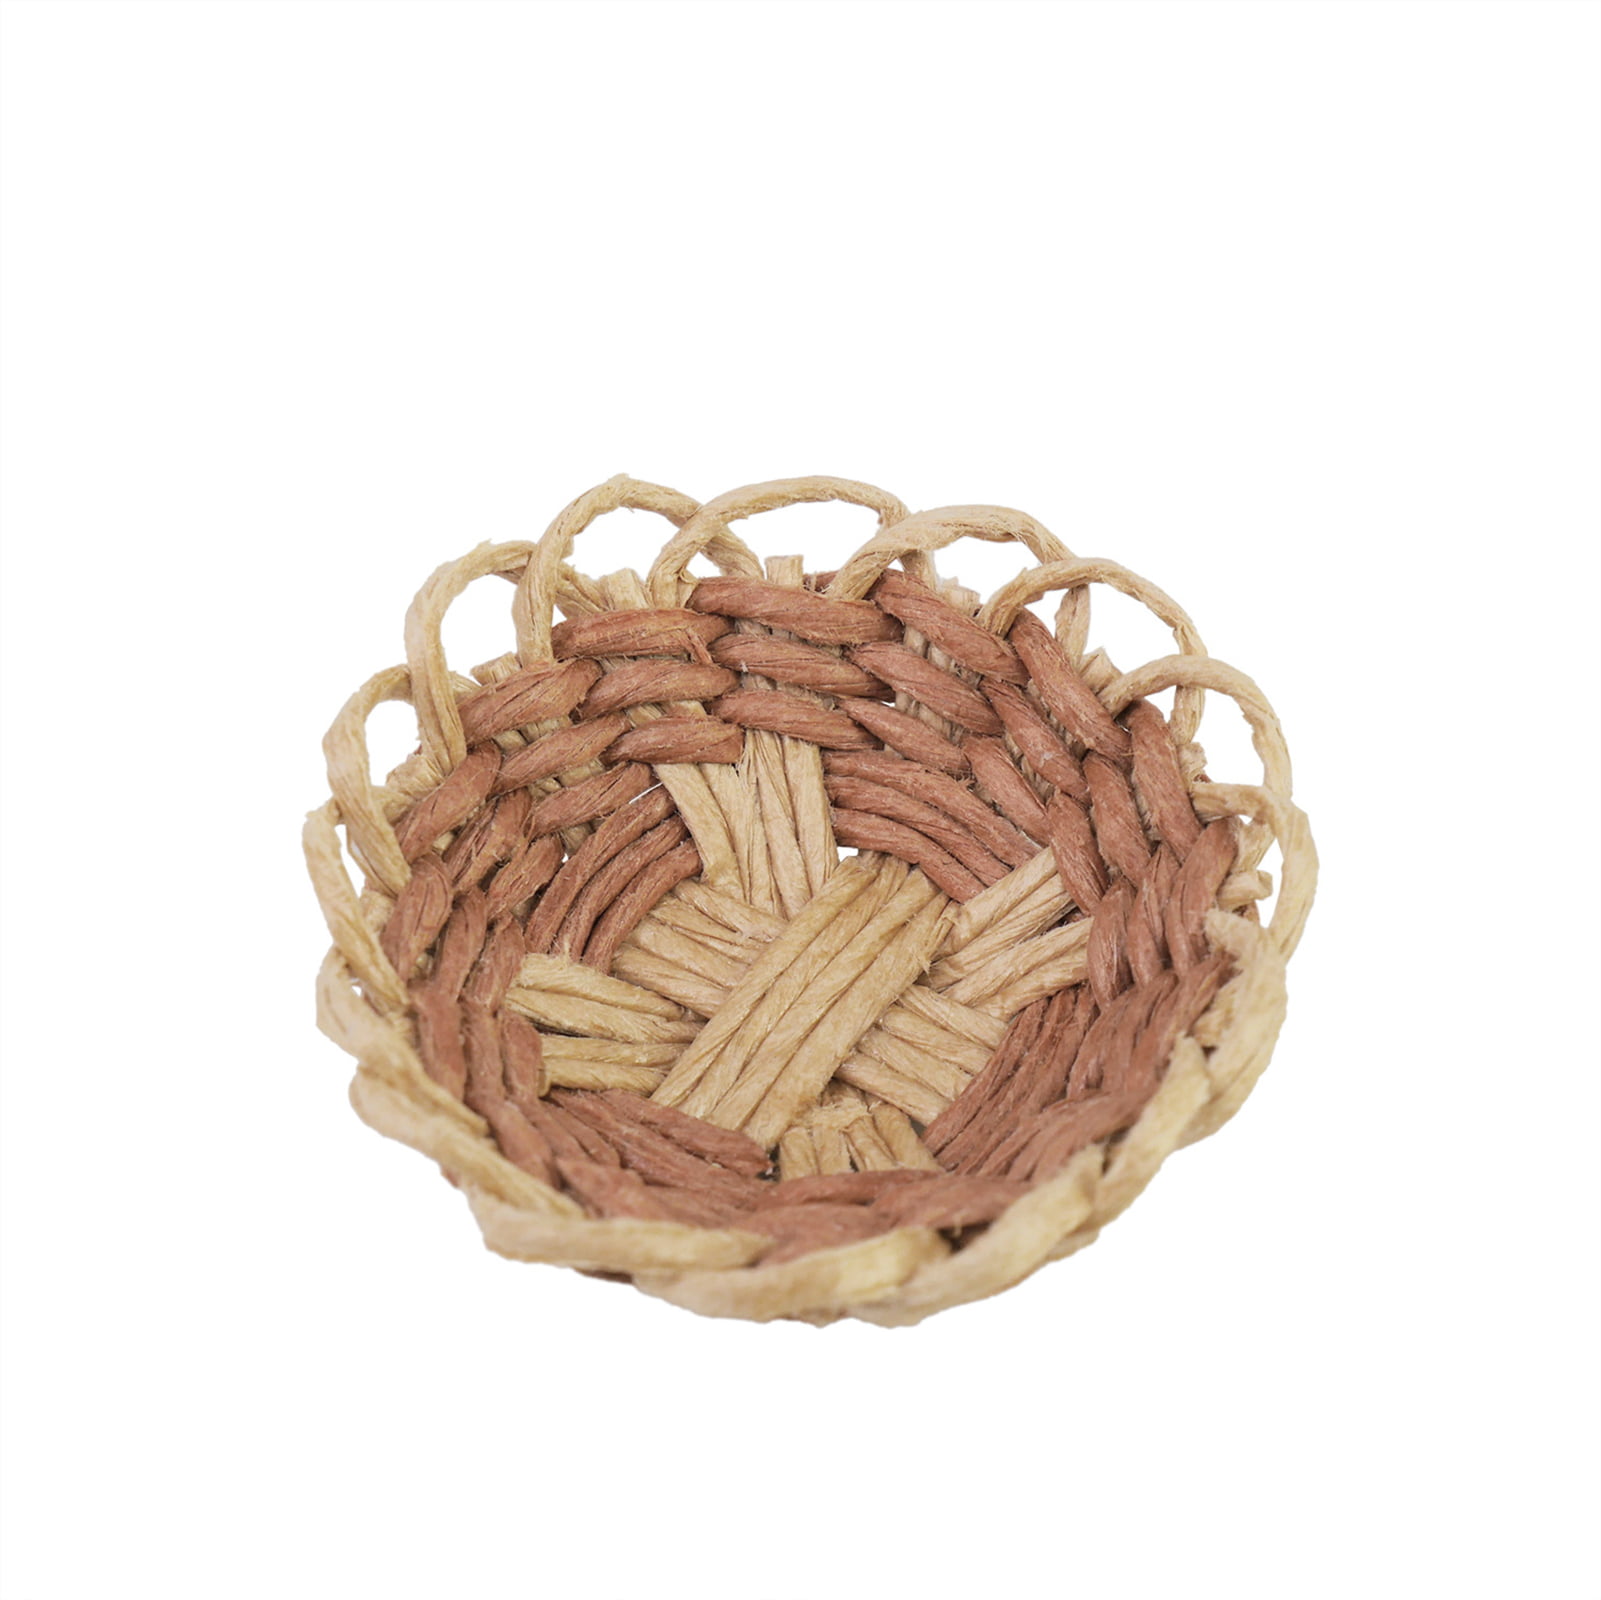 M1.4 1/12th scale DOLLS HOUSE PAIR OF FLAT ROUND WICKER BASKETS 